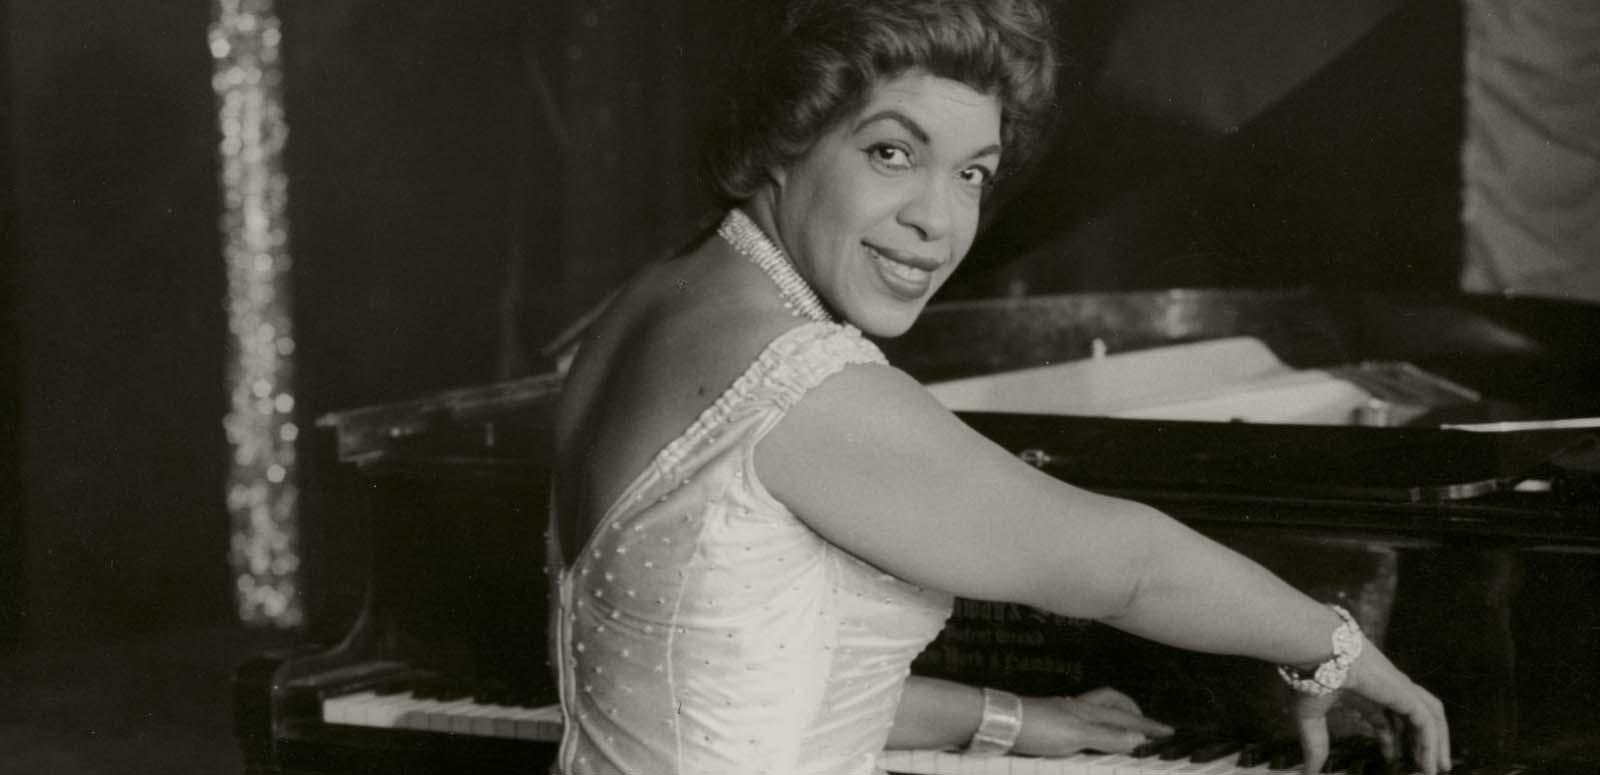 Winifred Atwell seated at the piano turns to smile at the camera